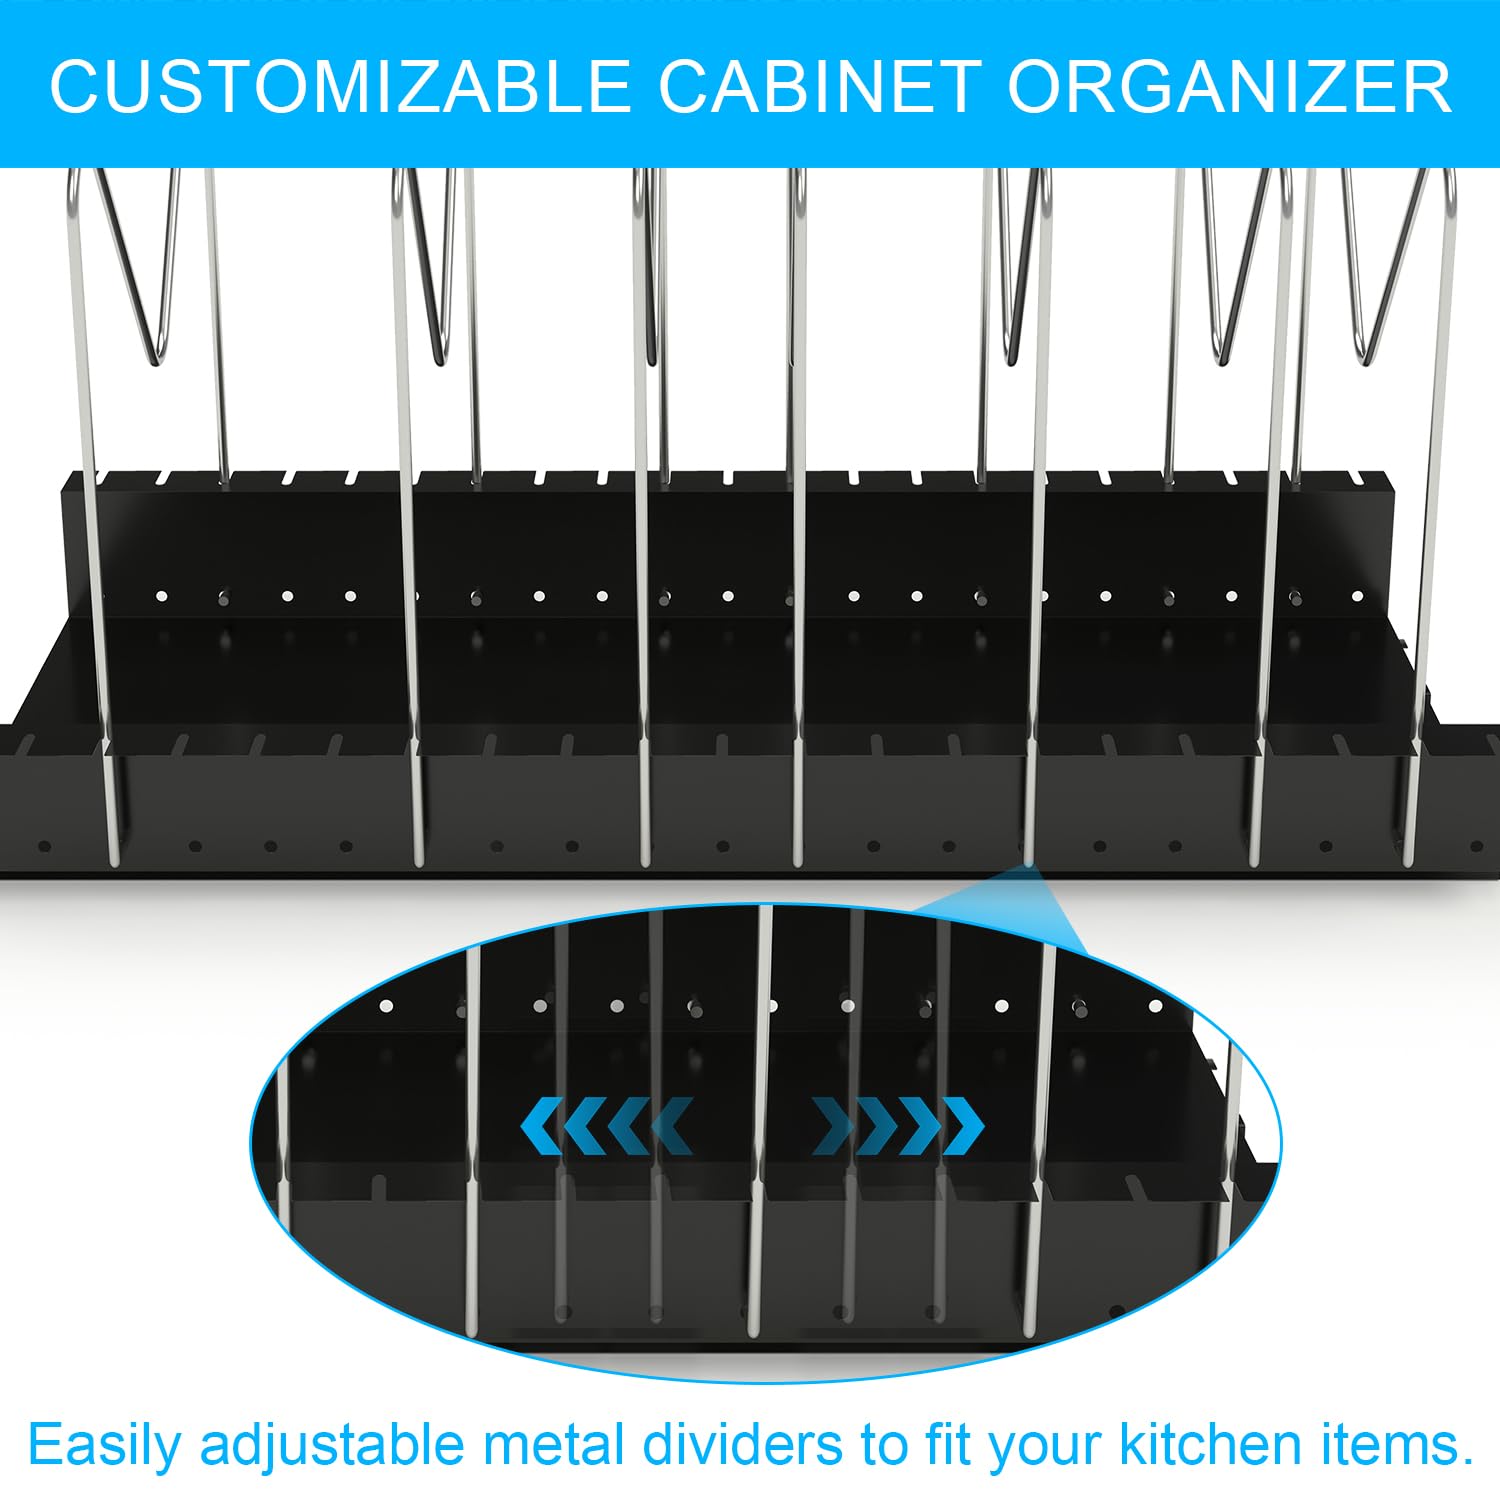 Pull Out Pots and Pans Organizer for Cabinet - Sliding Lid Holder and Pan Rack in Kitchen, Cabinet Pull Out Shelves, Slide Out Cabinet Organizer, Pot Lid, Bakeware and Pan Organizer, 16.5"Dx8"Wx7.5"H